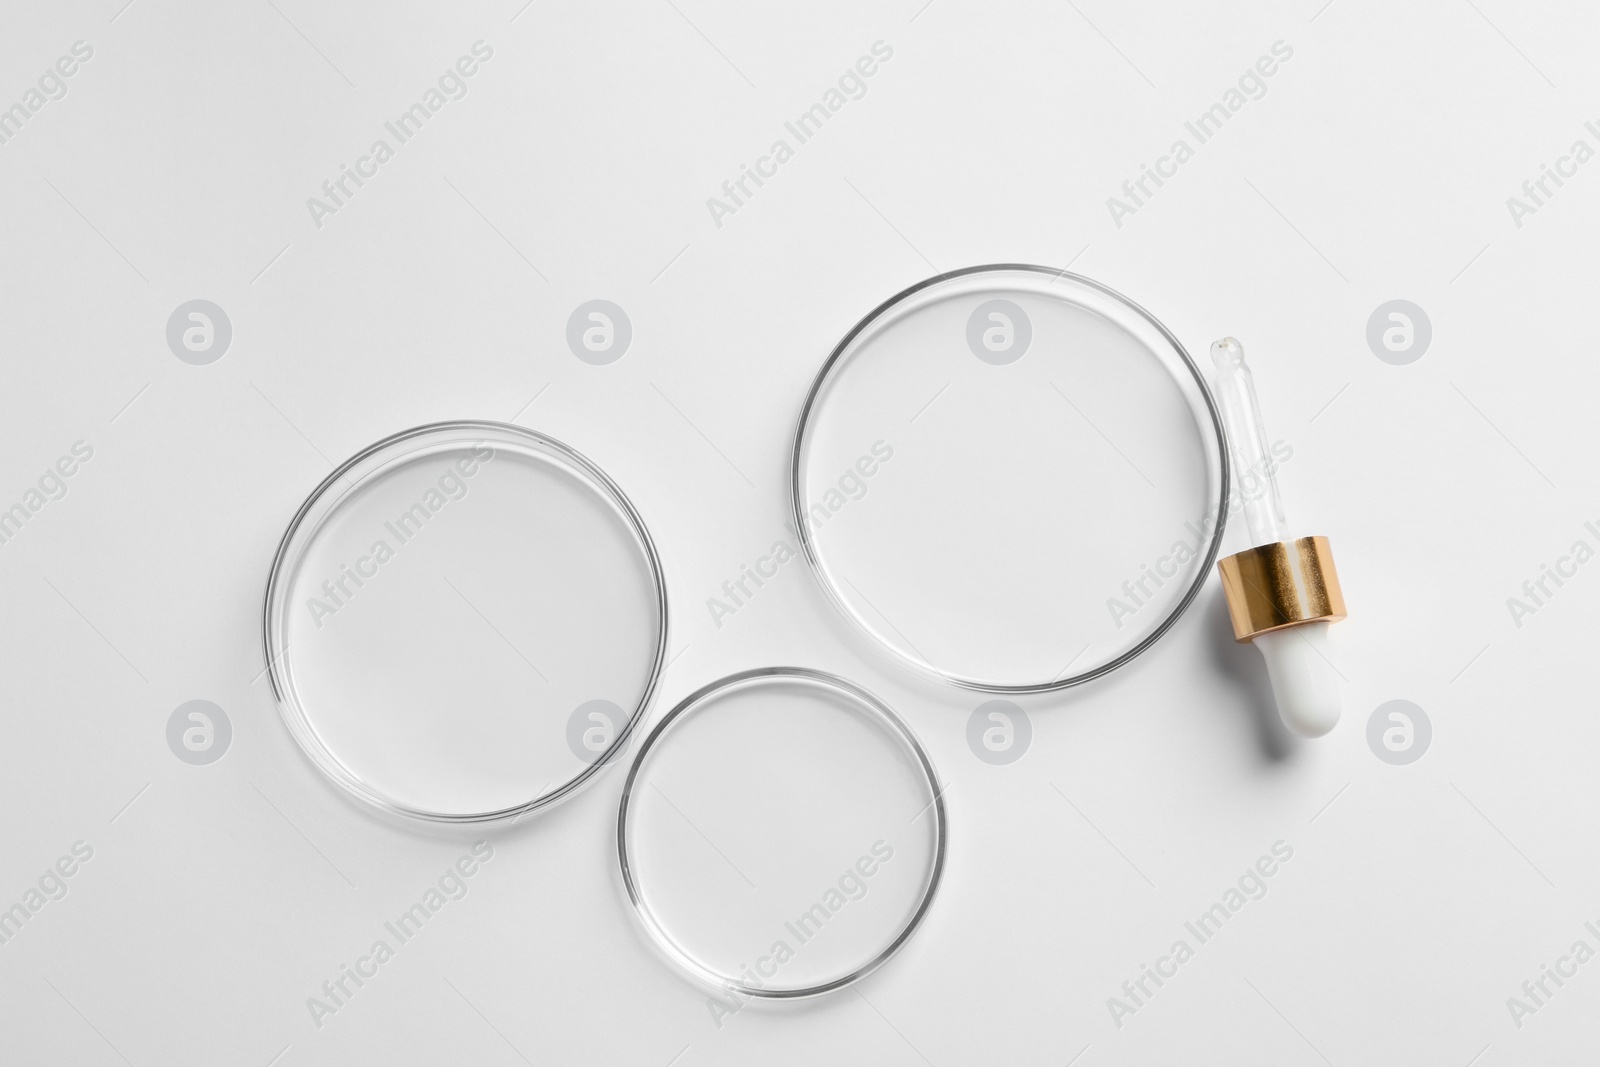 Photo of Empty Petri dishes and pipette on white background, flat lay